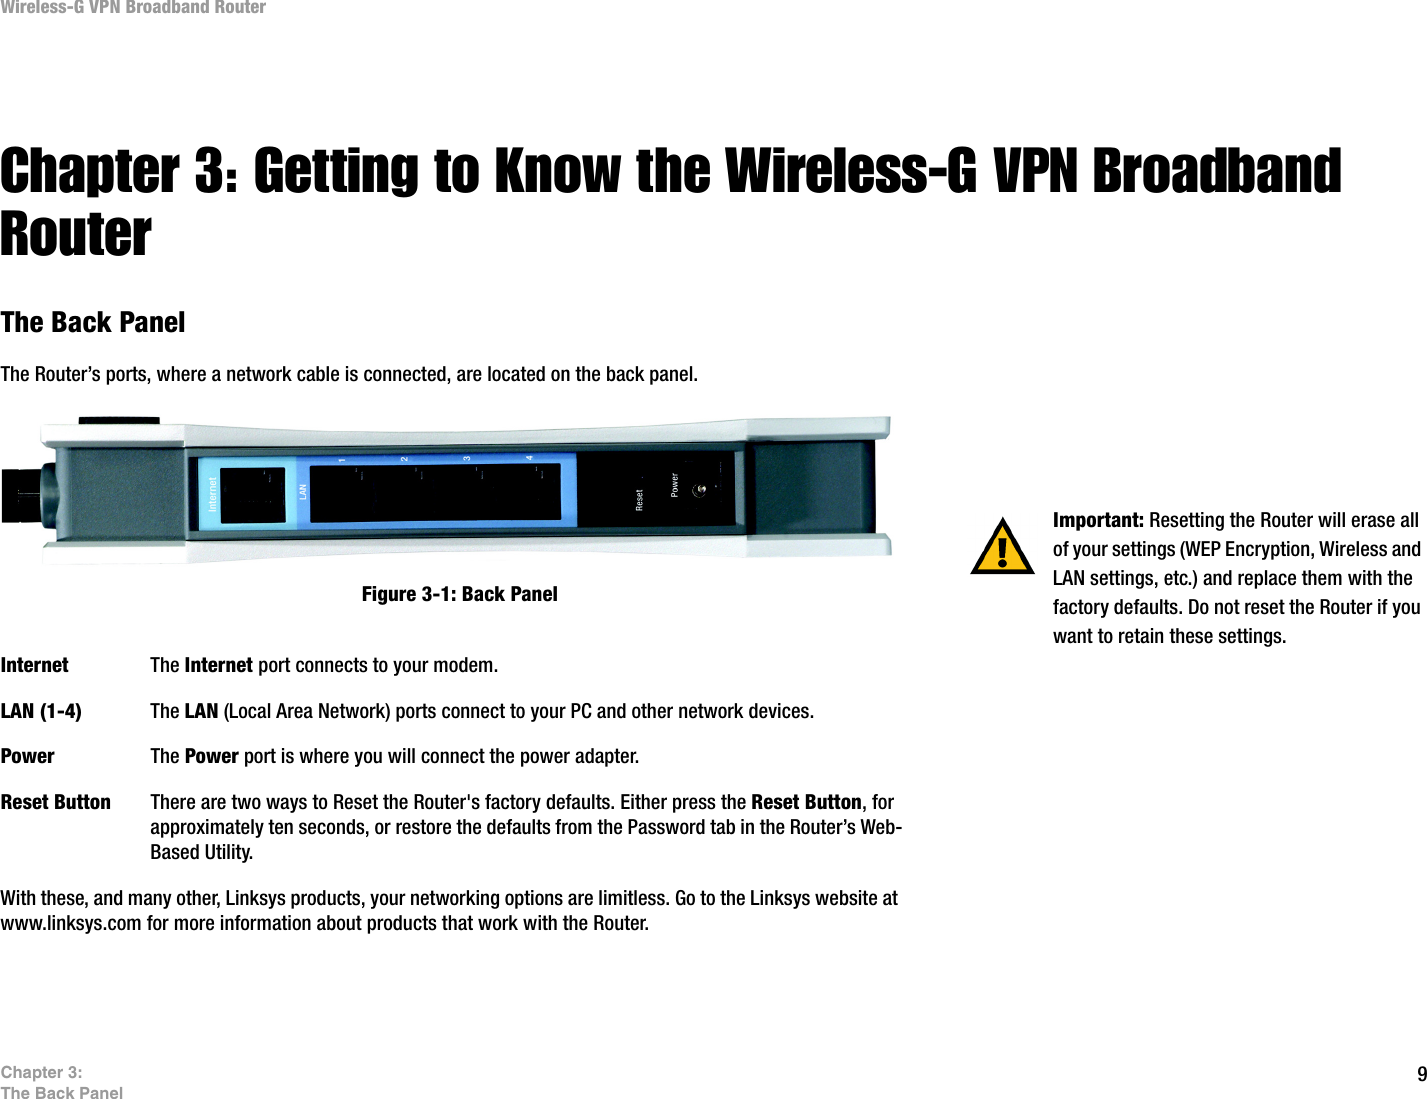 9Chapter 3: The Back PanelWireless-G VPN Broadband Router Chapter 3: Getting to Know the Wireless-G VPN Broadband RouterThe Back PanelThe Router’s ports, where a network cable is connected, are located on the back panel.Internet The Internet port connects to your modem.LAN (1-4) The LAN (Local Area Network) ports connect to your PC and other network devices.Power The Power port is where you will connect the power adapter.Reset Button There are two ways to Reset the Router&apos;s factory defaults. Either press the Reset Button, for approximately ten seconds, or restore the defaults from the Password tab in the Router’s Web-Based Utility.With these, and many other, Linksys products, your networking options are limitless. Go to the Linksys website at www.linksys.com for more information about products that work with the Router. Important: Resetting the Router will erase all of your settings (WEP Encryption, Wireless and LAN settings, etc.) and replace them with the factory defaults. Do not reset the Router if you want to retain these settings.Figure 3-1: Back Panel